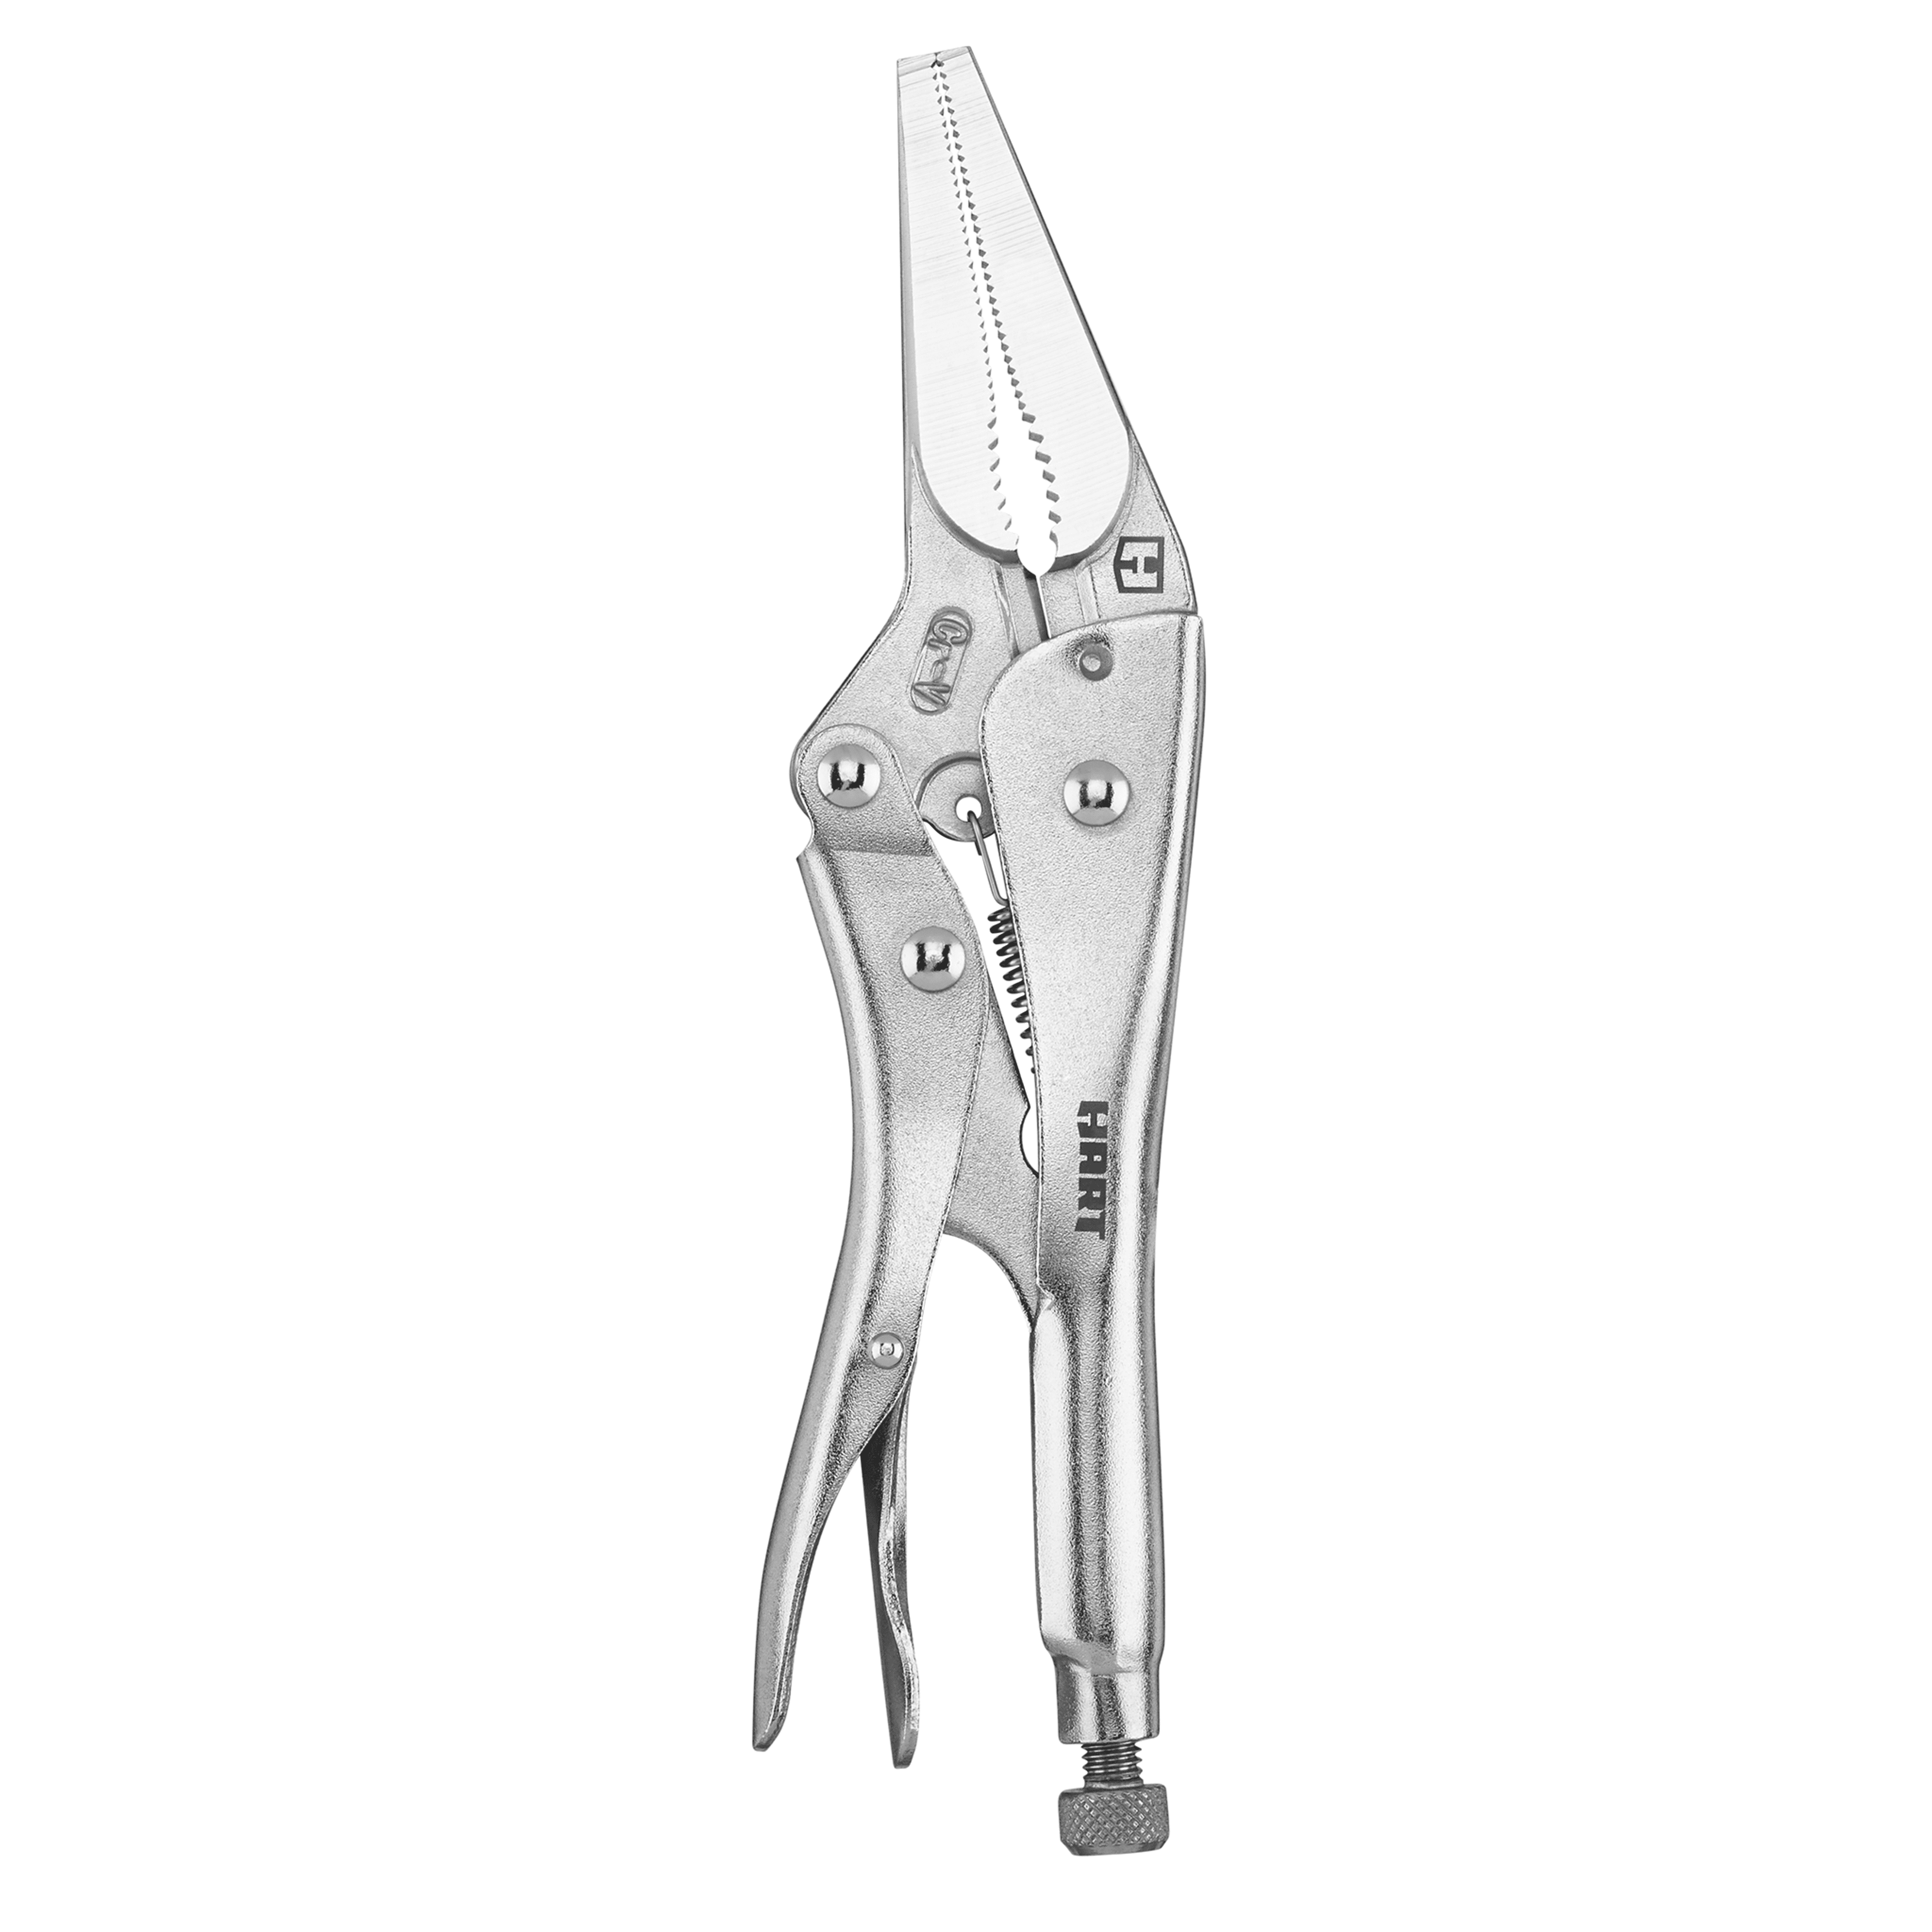 PITTSBURGH Curved Jaw Locking Pliers Choose Size 